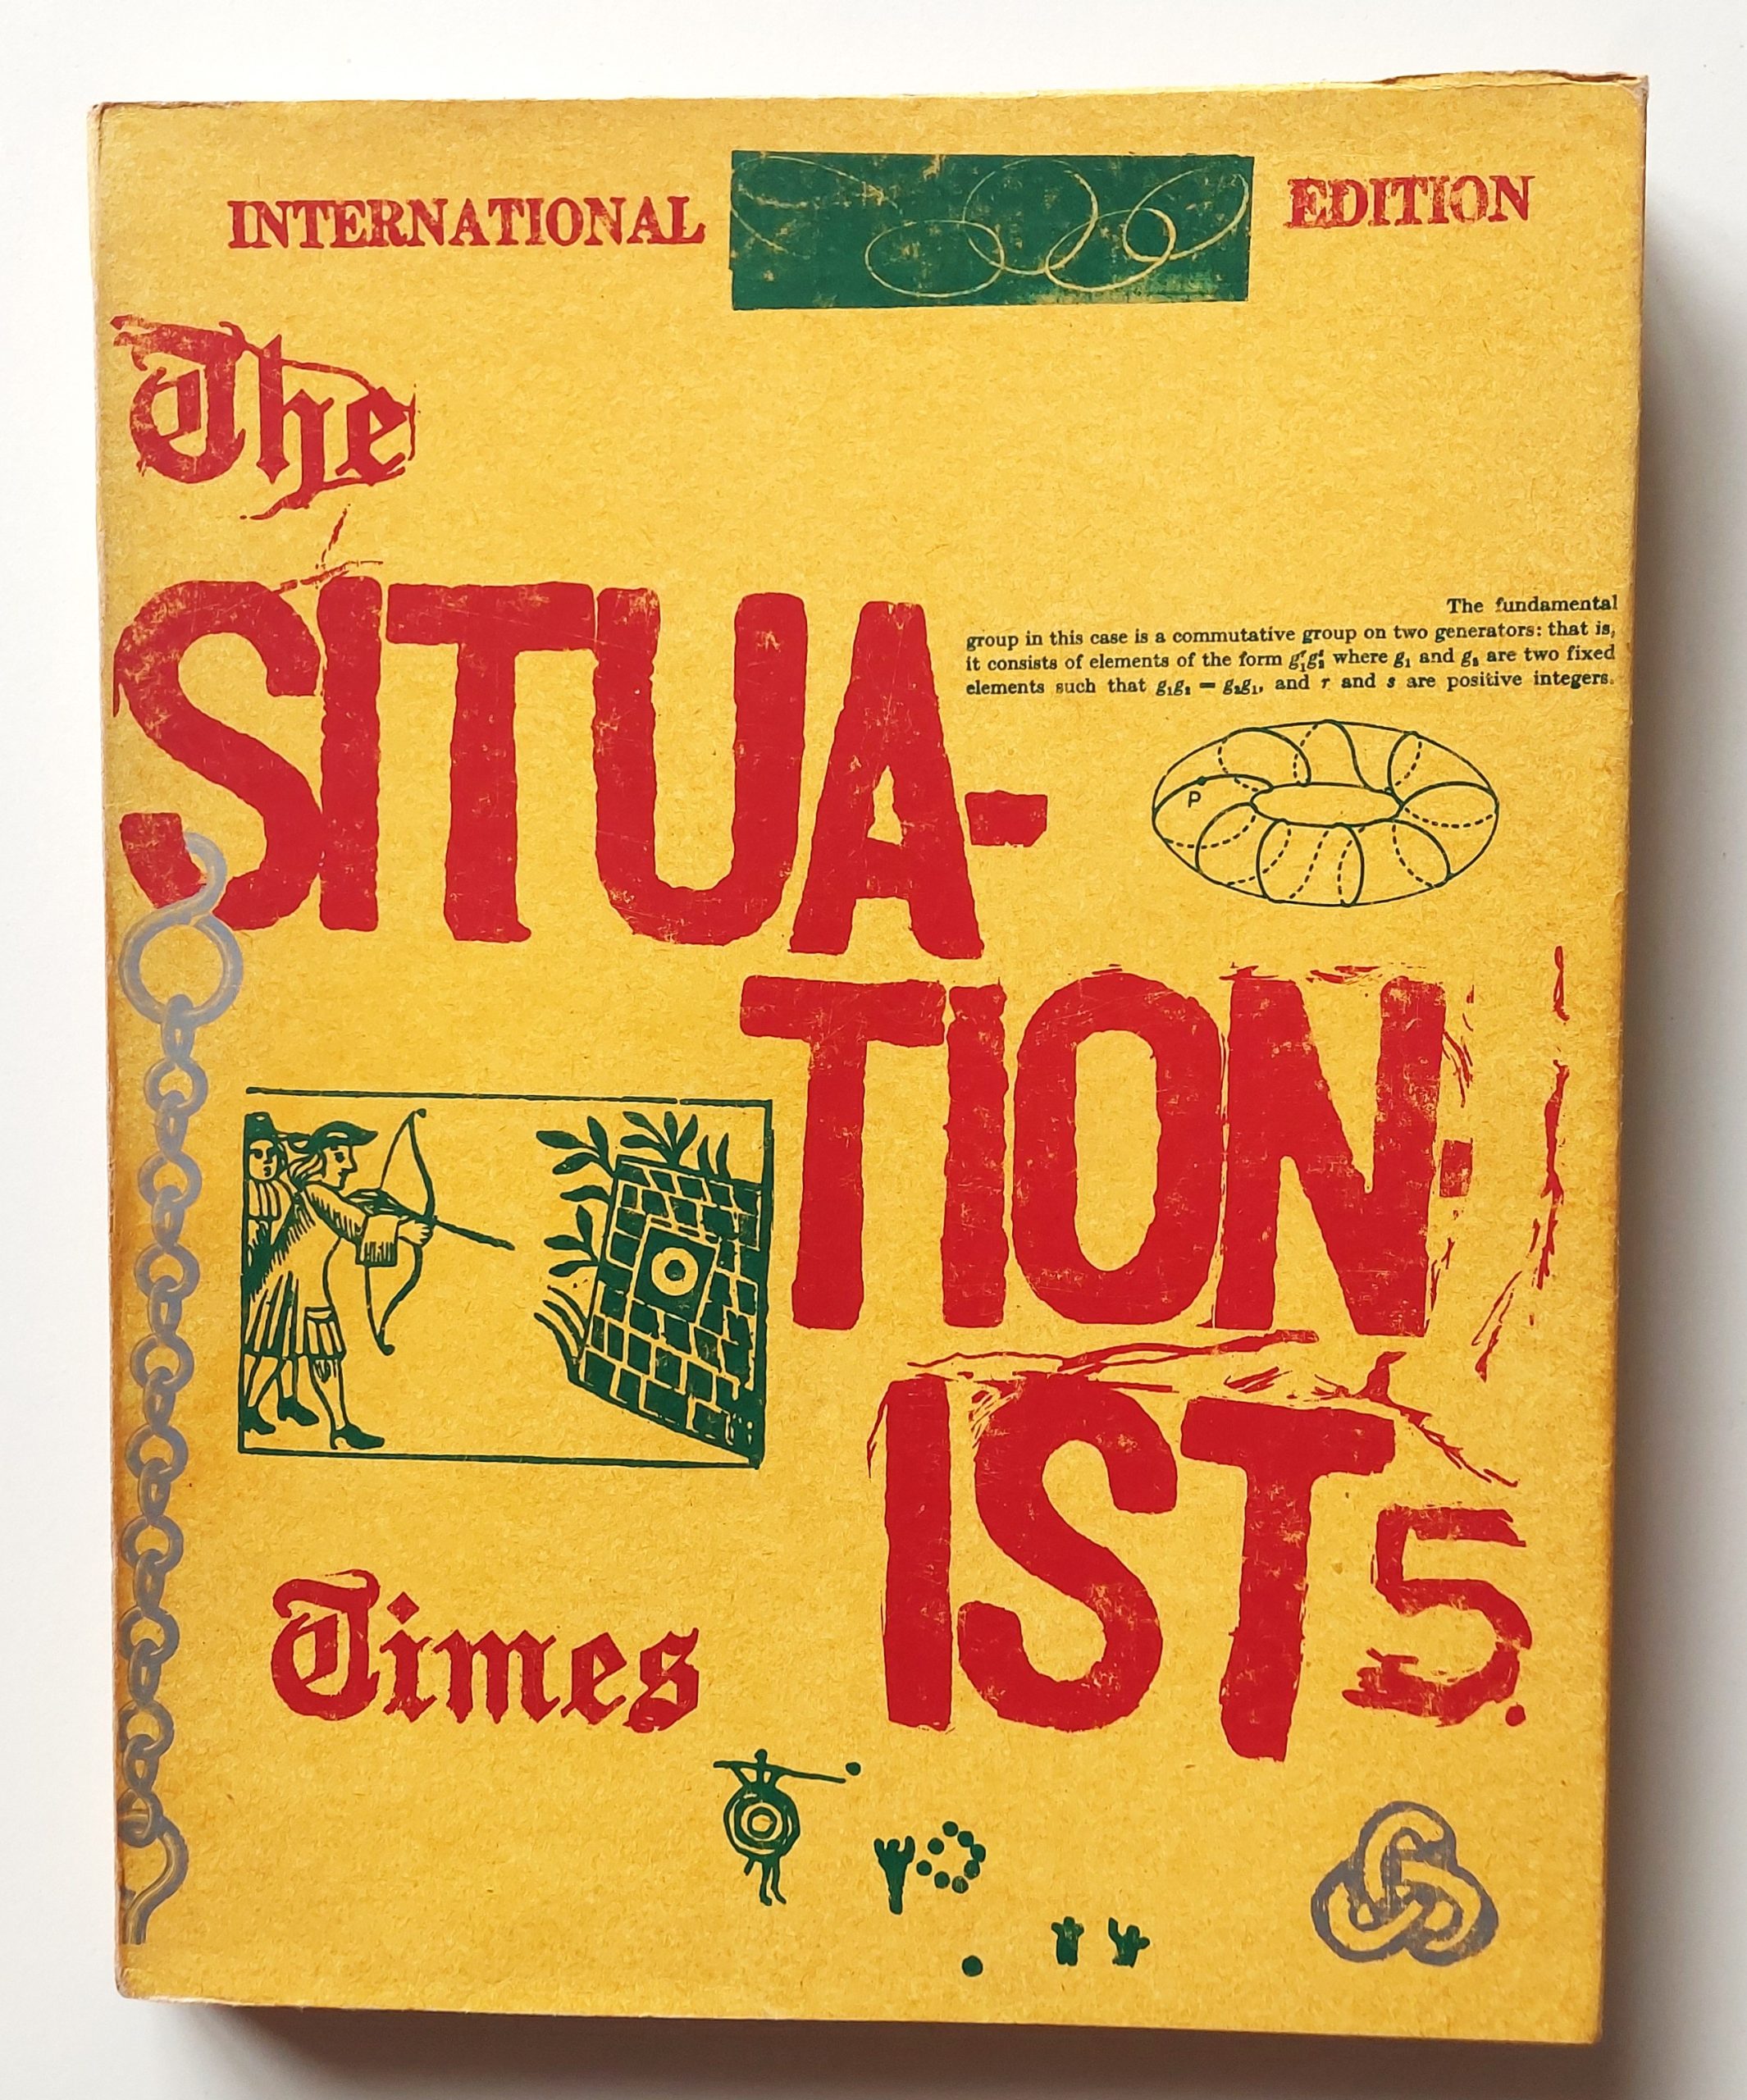 JACQUELINE DE JONG (EDITOR) - The Situationist Times 5